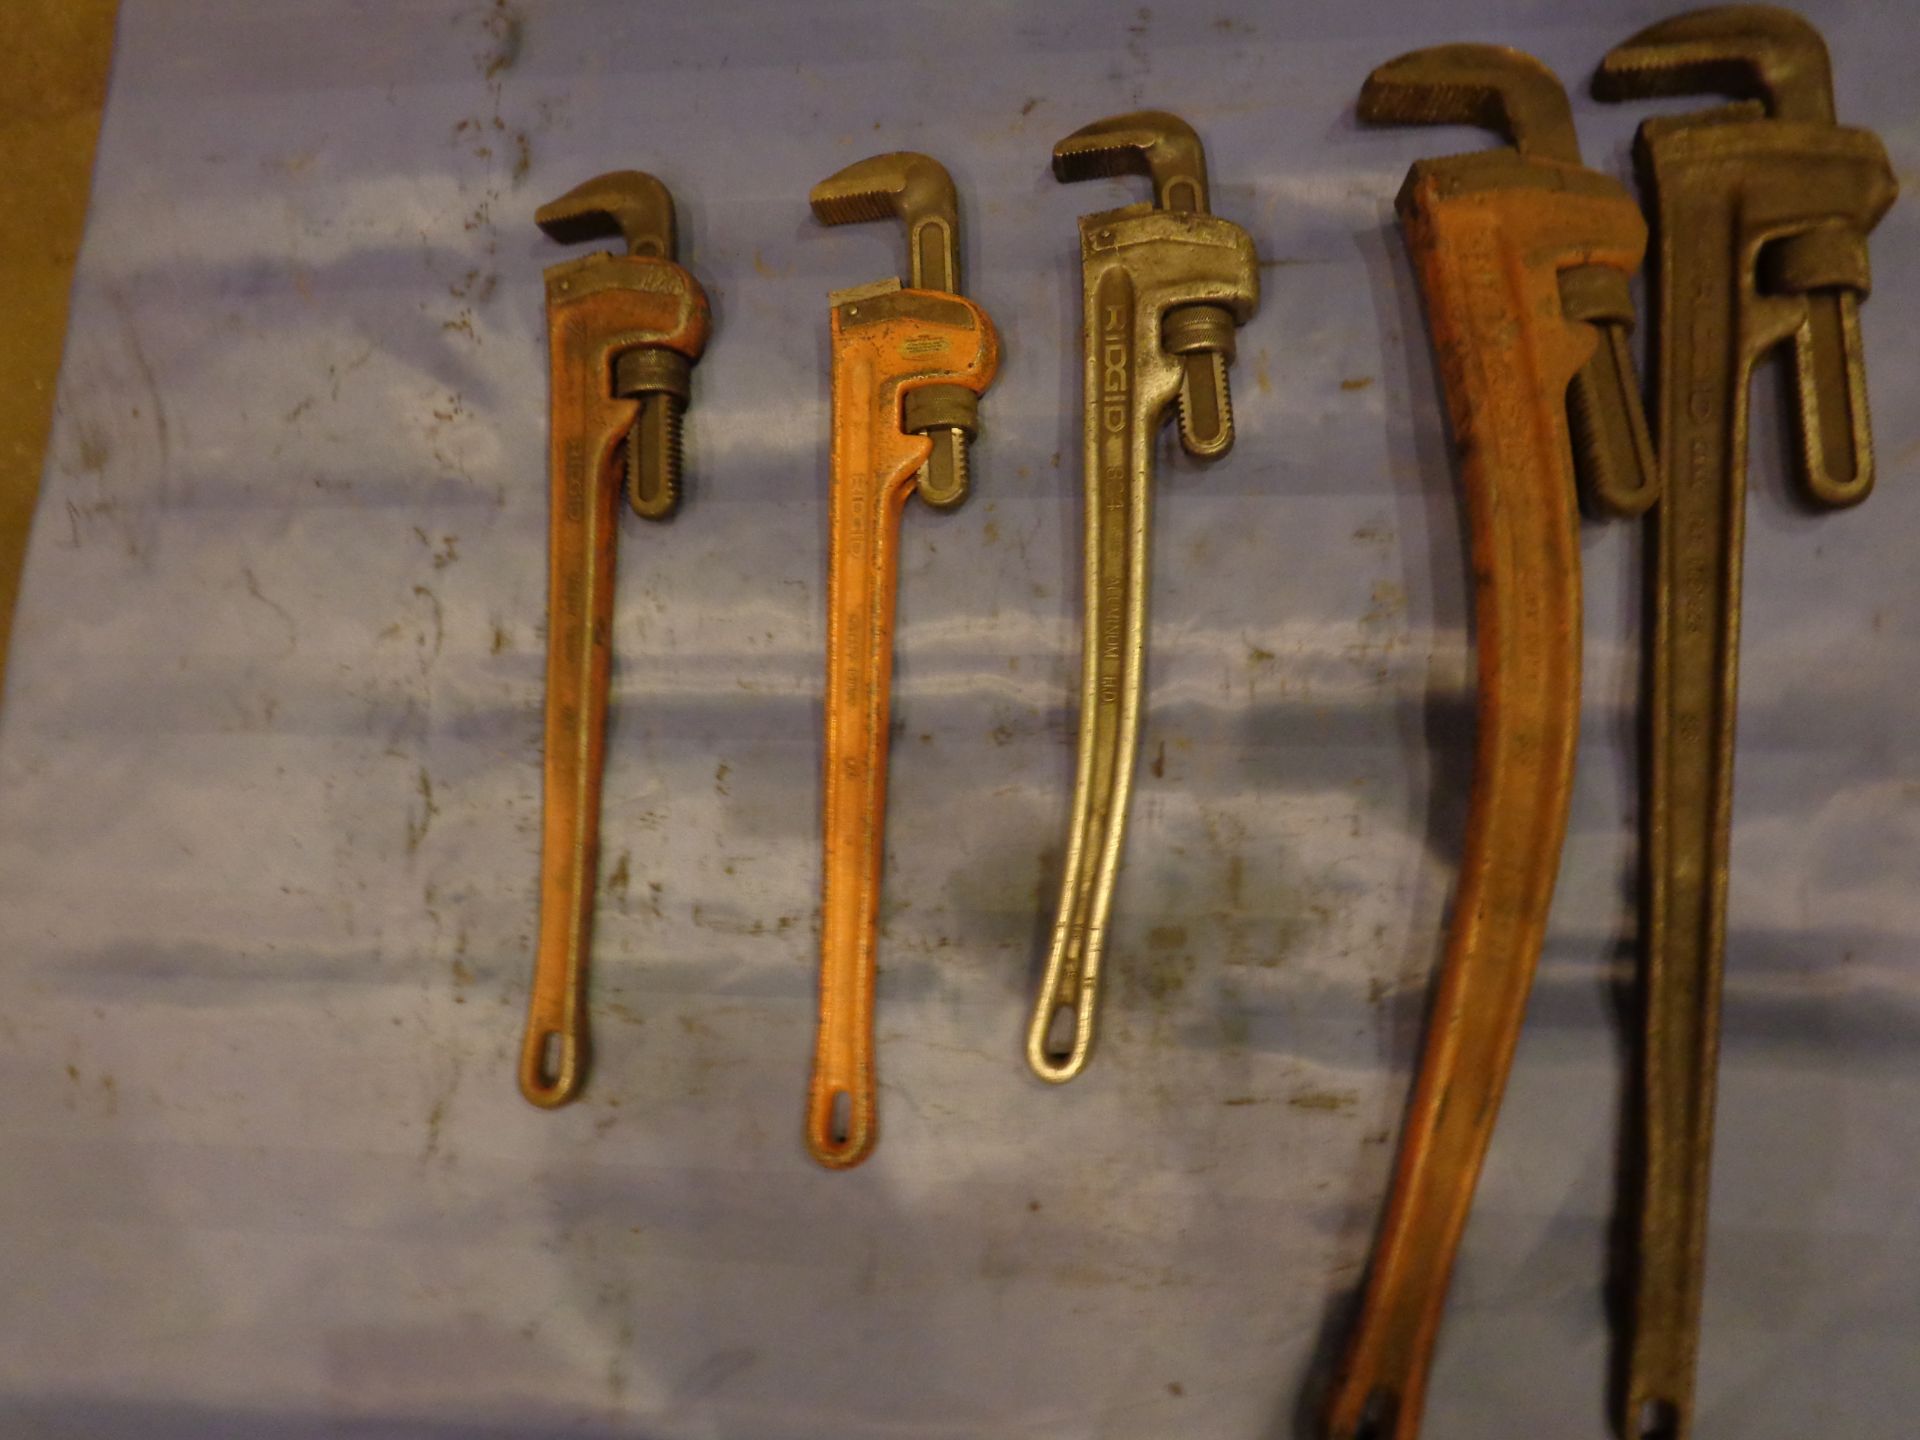 5 Pipe Wrenches